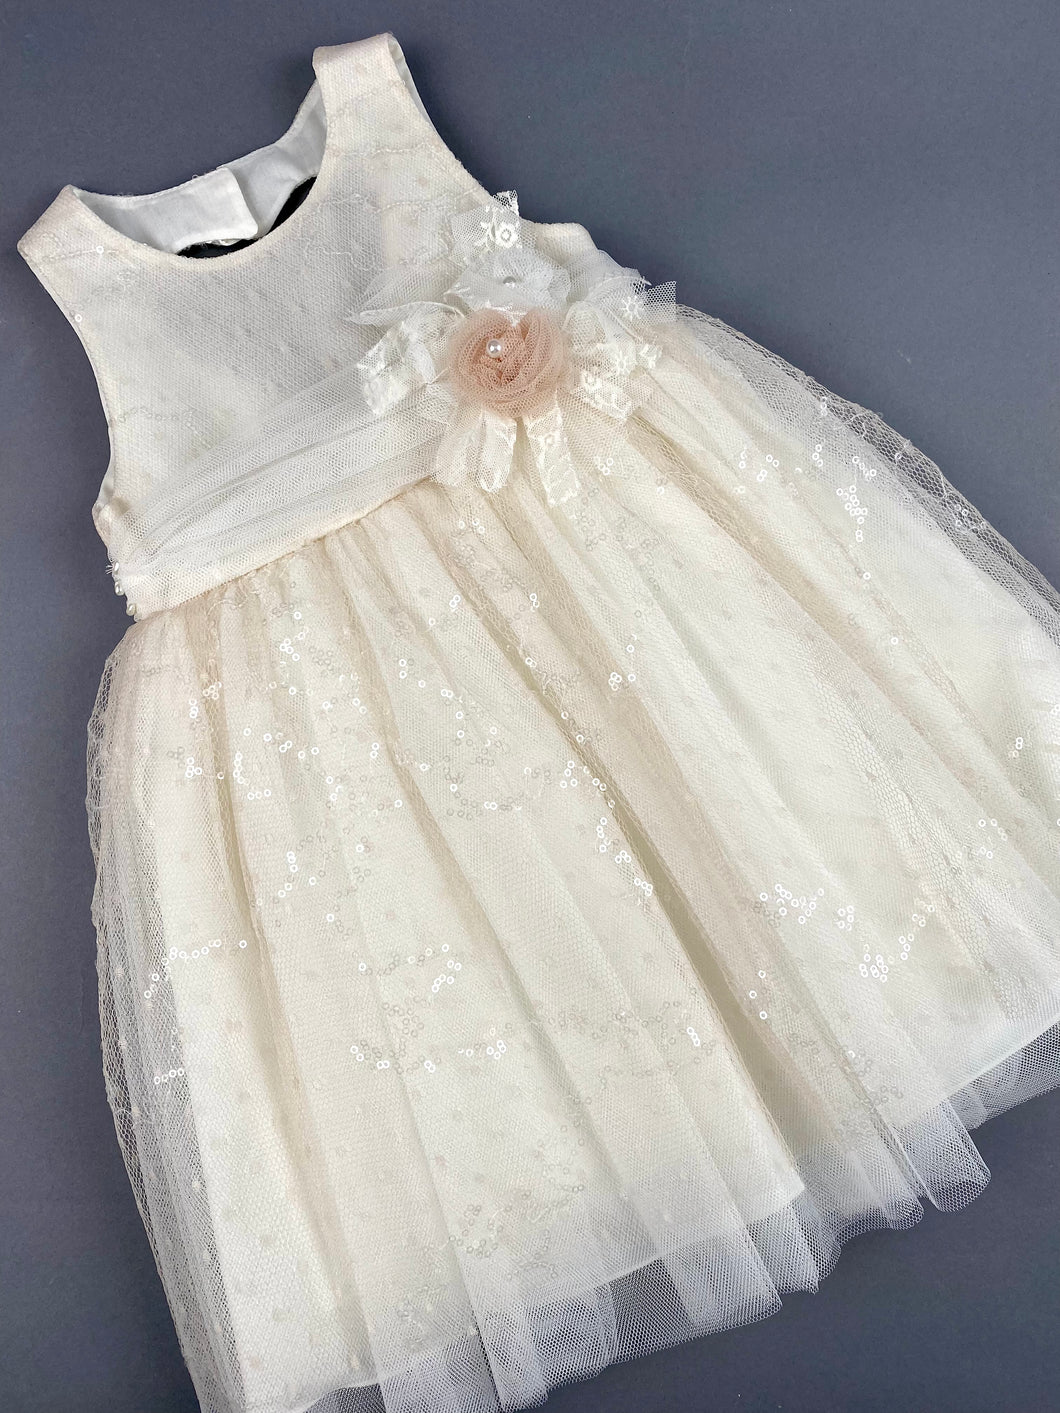 Dress 58 Girls Baptismal Christening Dress very light dusty rose with sequence, matching Bolero and Hat. Made in Greece exclusively for Rosies Collections.